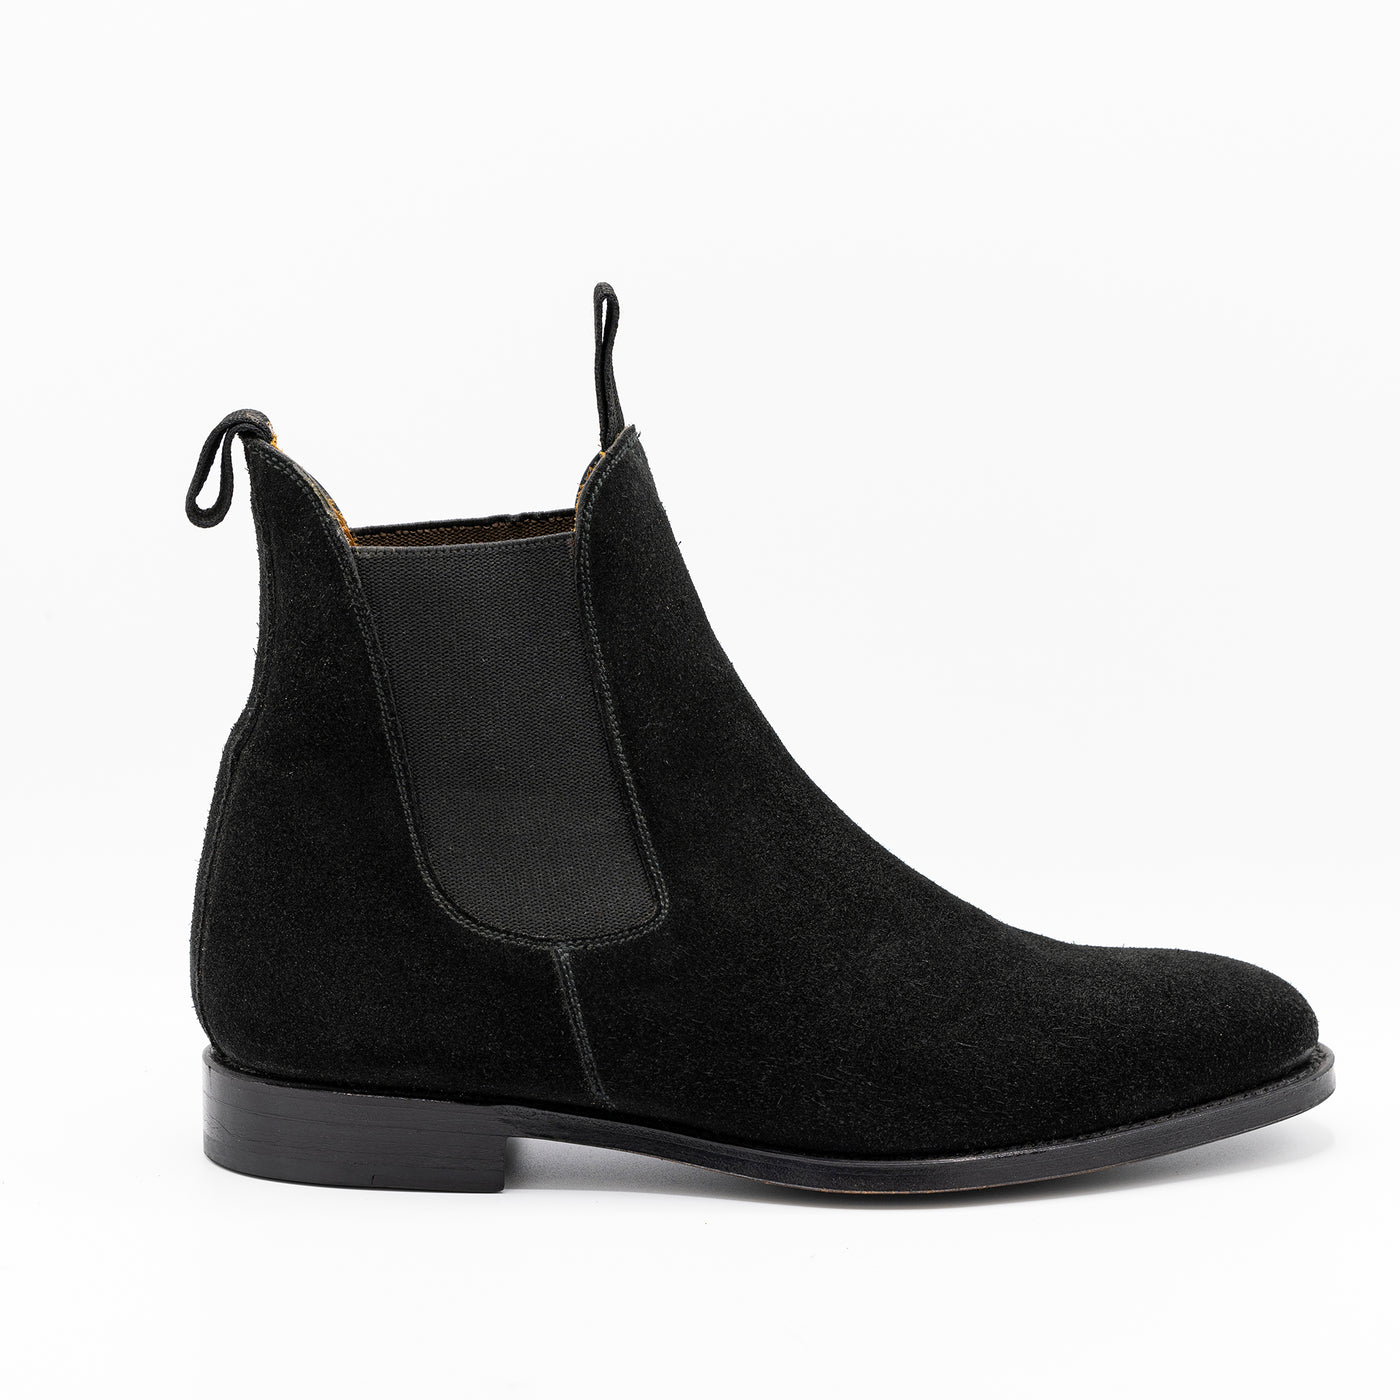 CHELSEA BOOTS in BLACK SUEDE